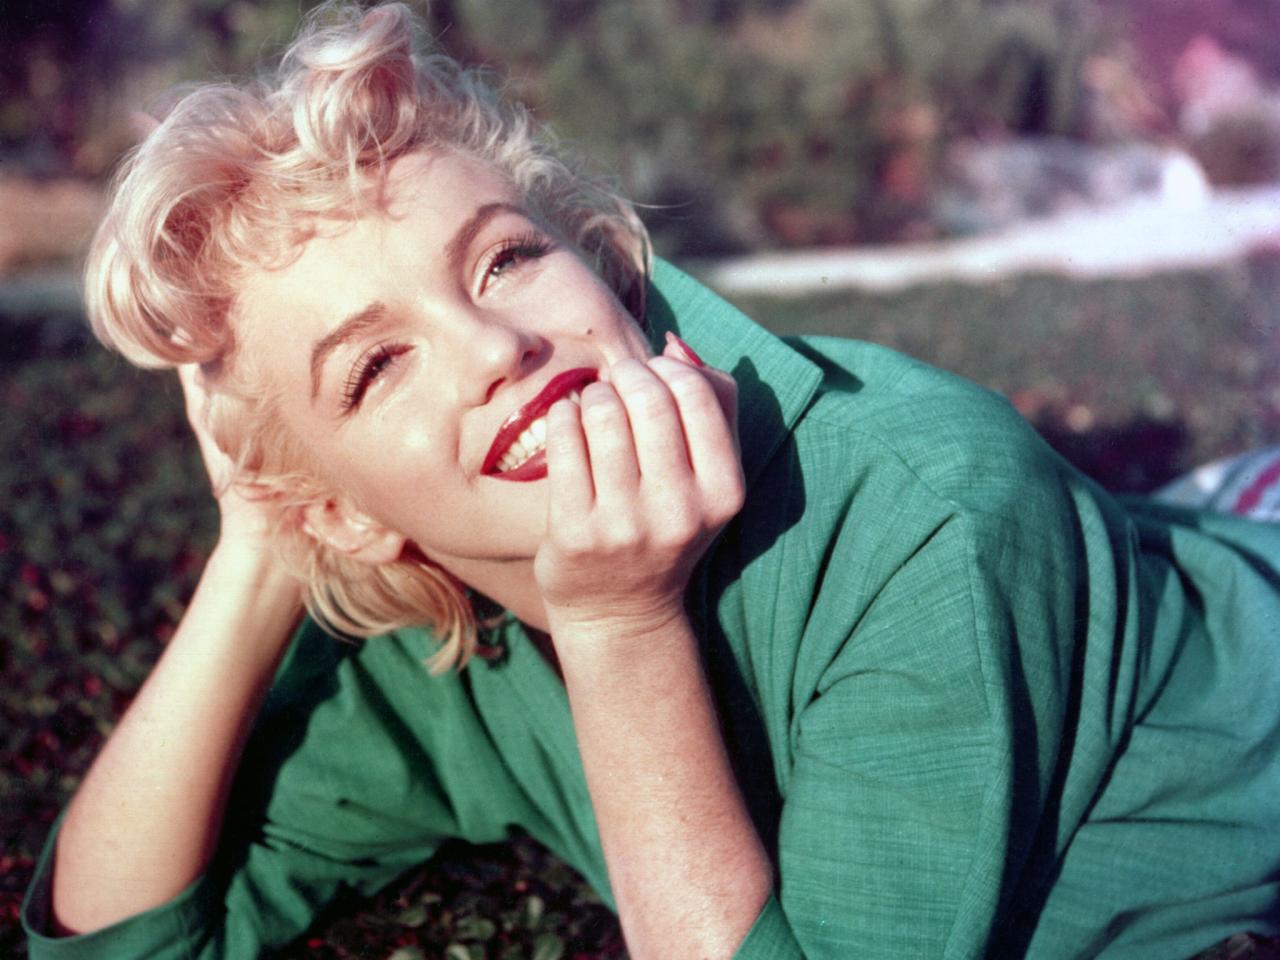 How Did Marilyn Monroe Die? Inside The Icon's Mysterious Death